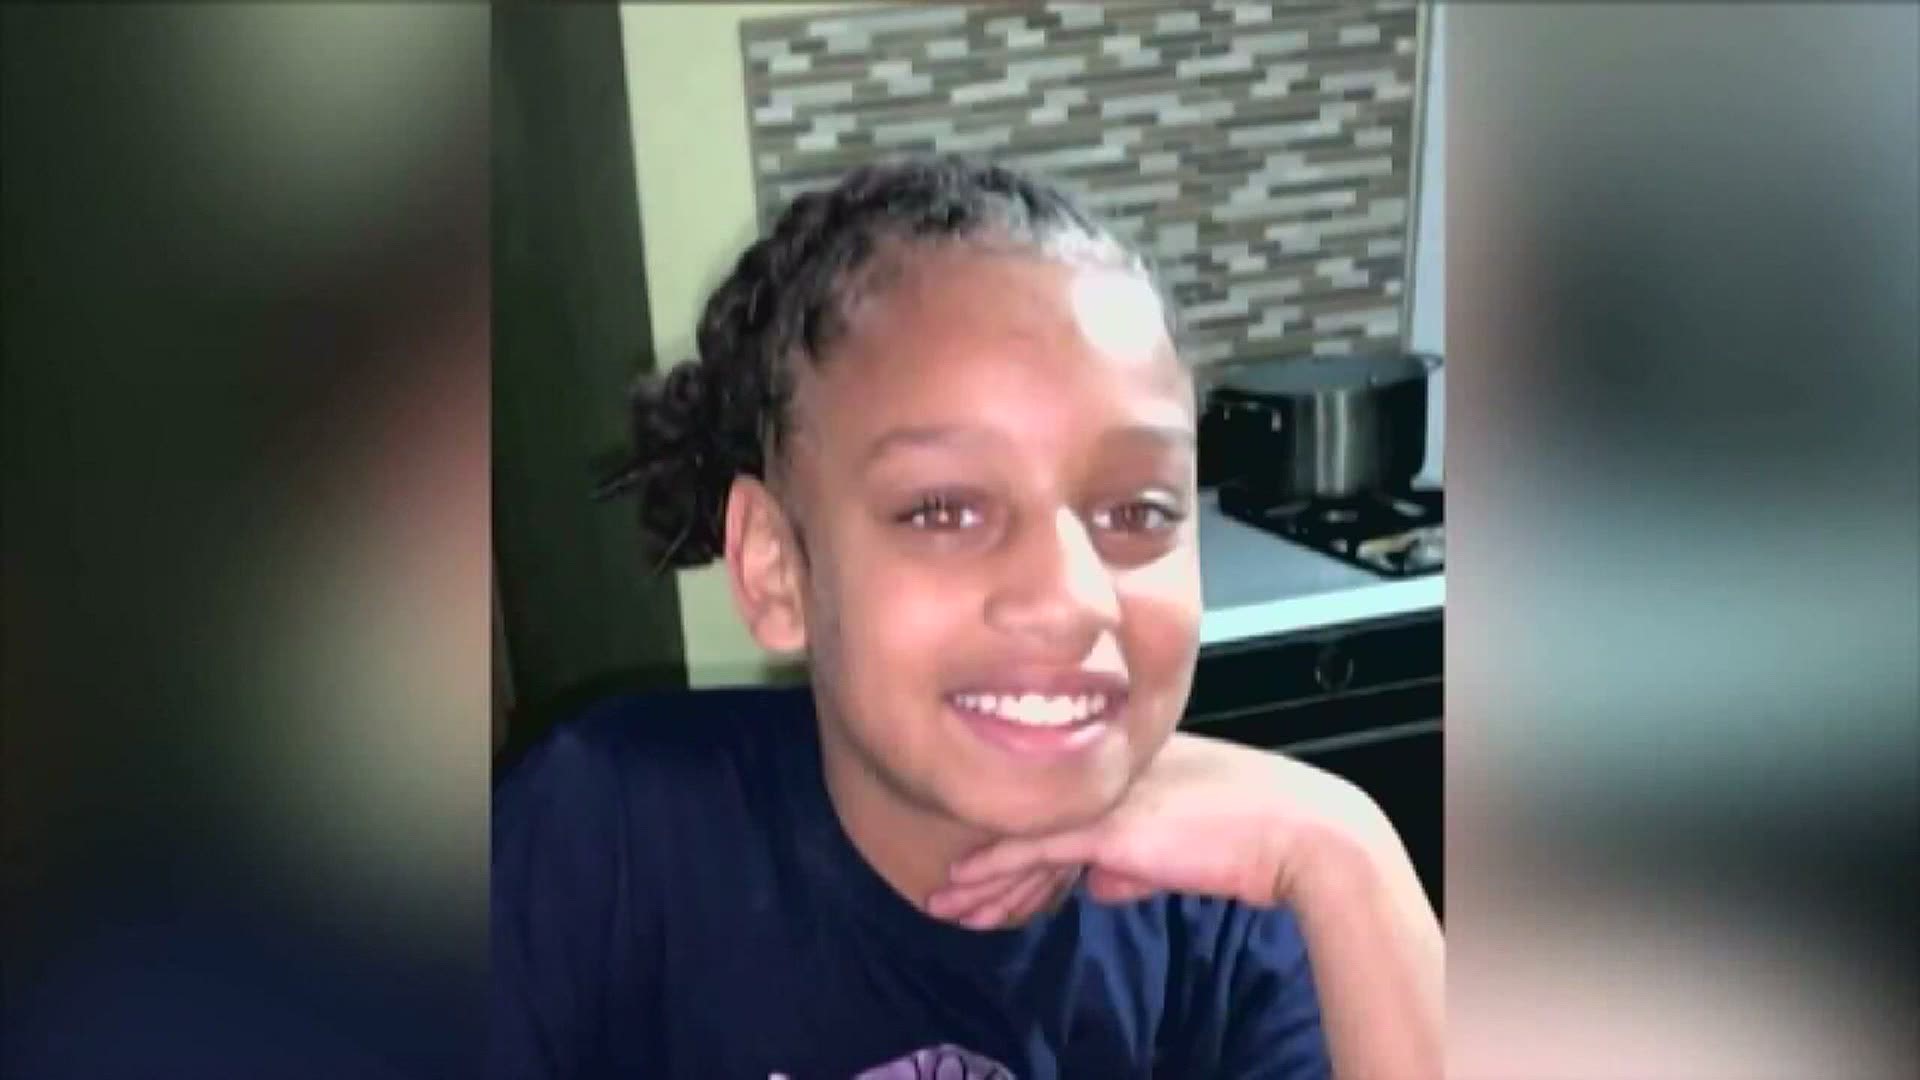 Breasia Terrell went missing on July 10th, 2020